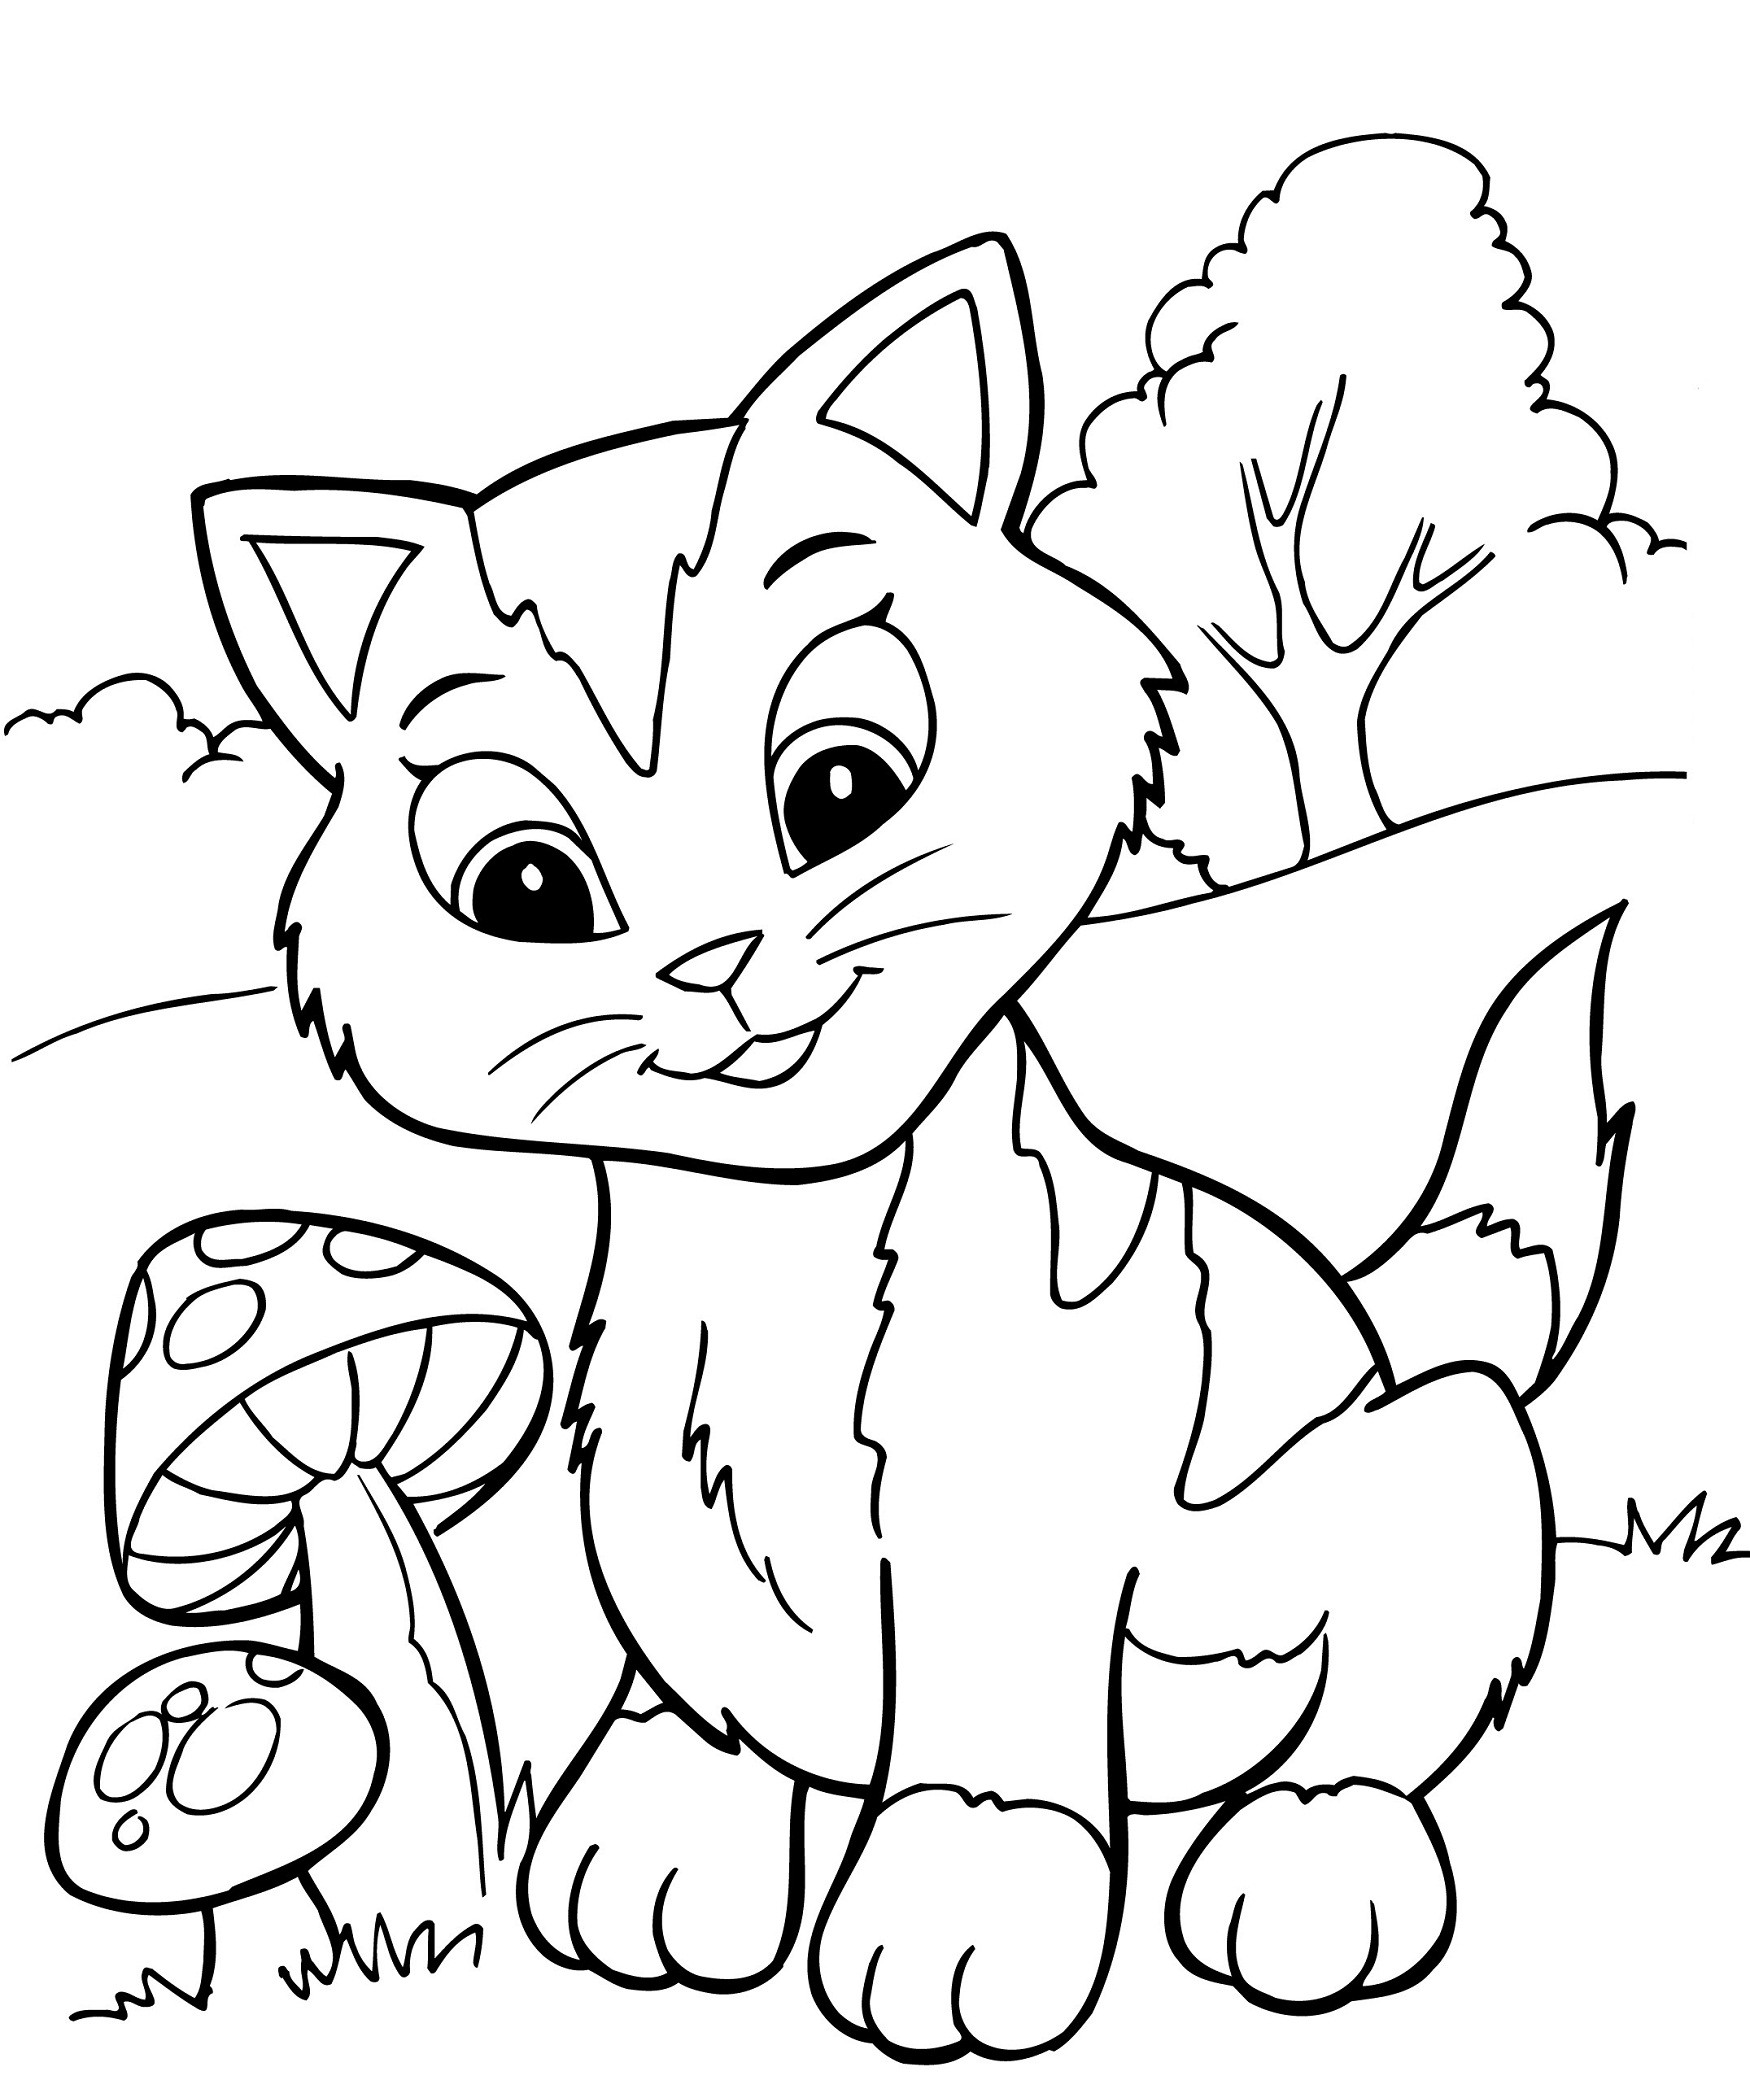 Coloring Pages For Kids Pdf
 Printable Coloring Book Pages for Kids Gallery